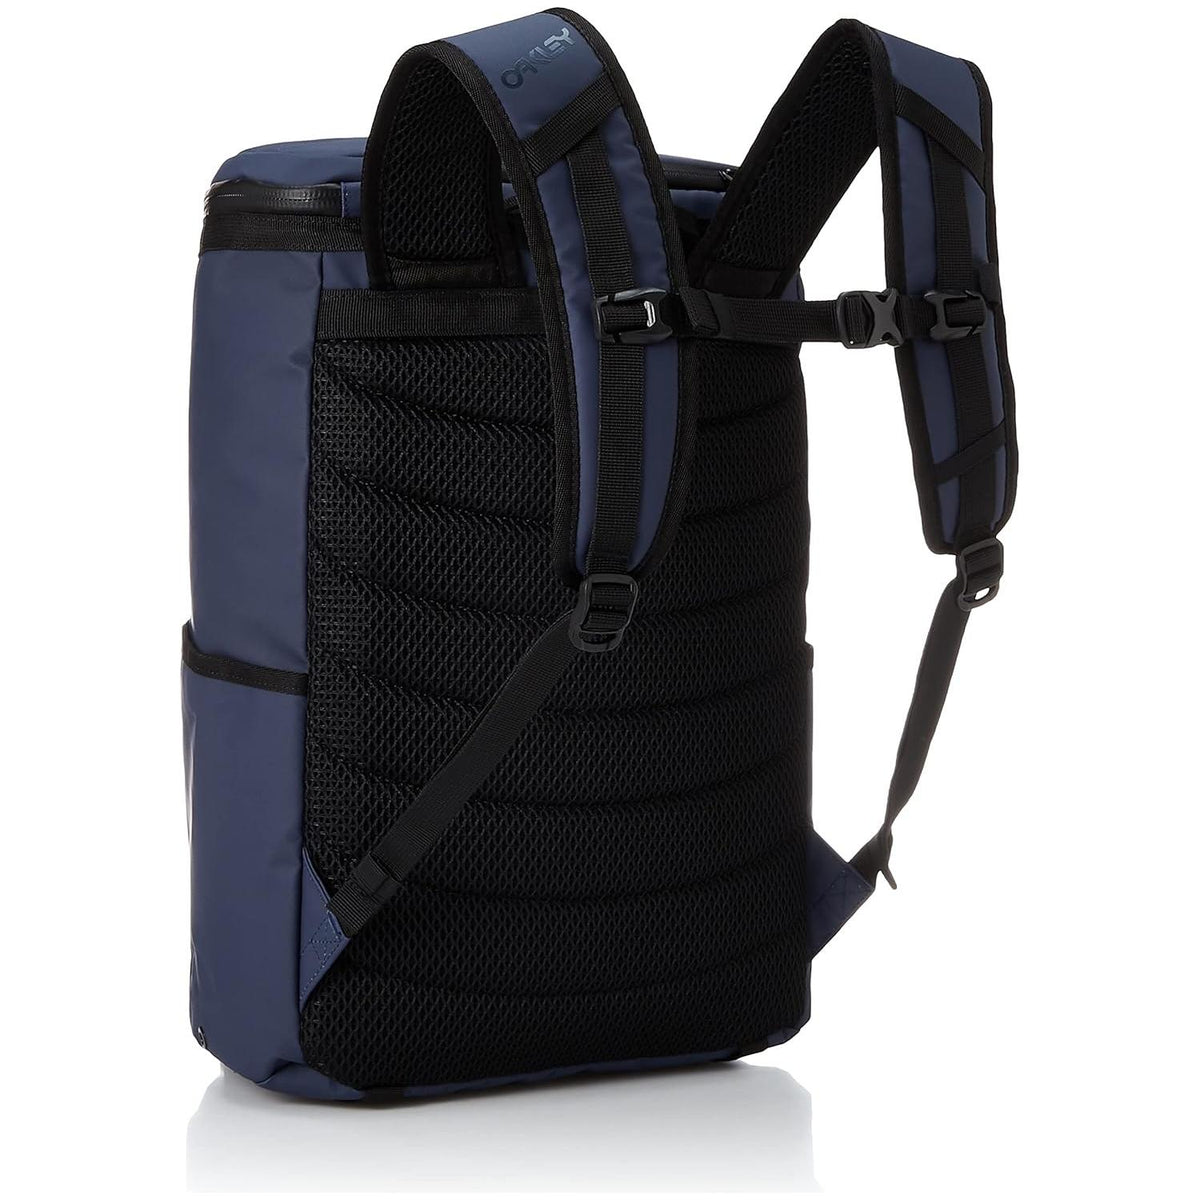 Oakley Square Rc Backpack